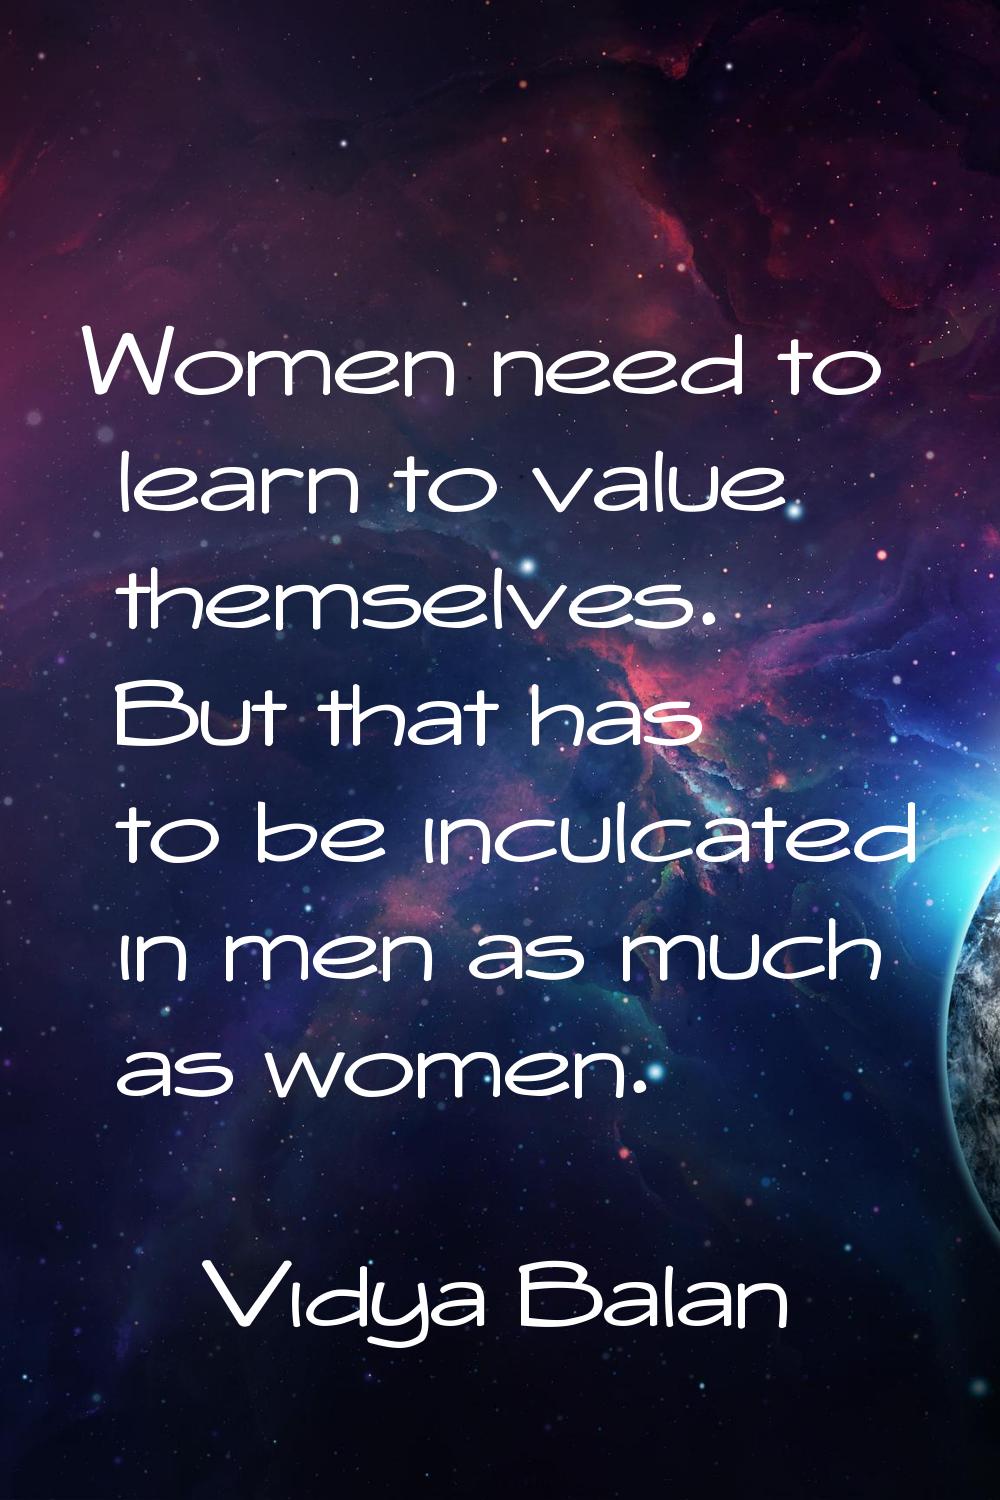 Women need to learn to value themselves. But that has to be inculcated in men as much as women.